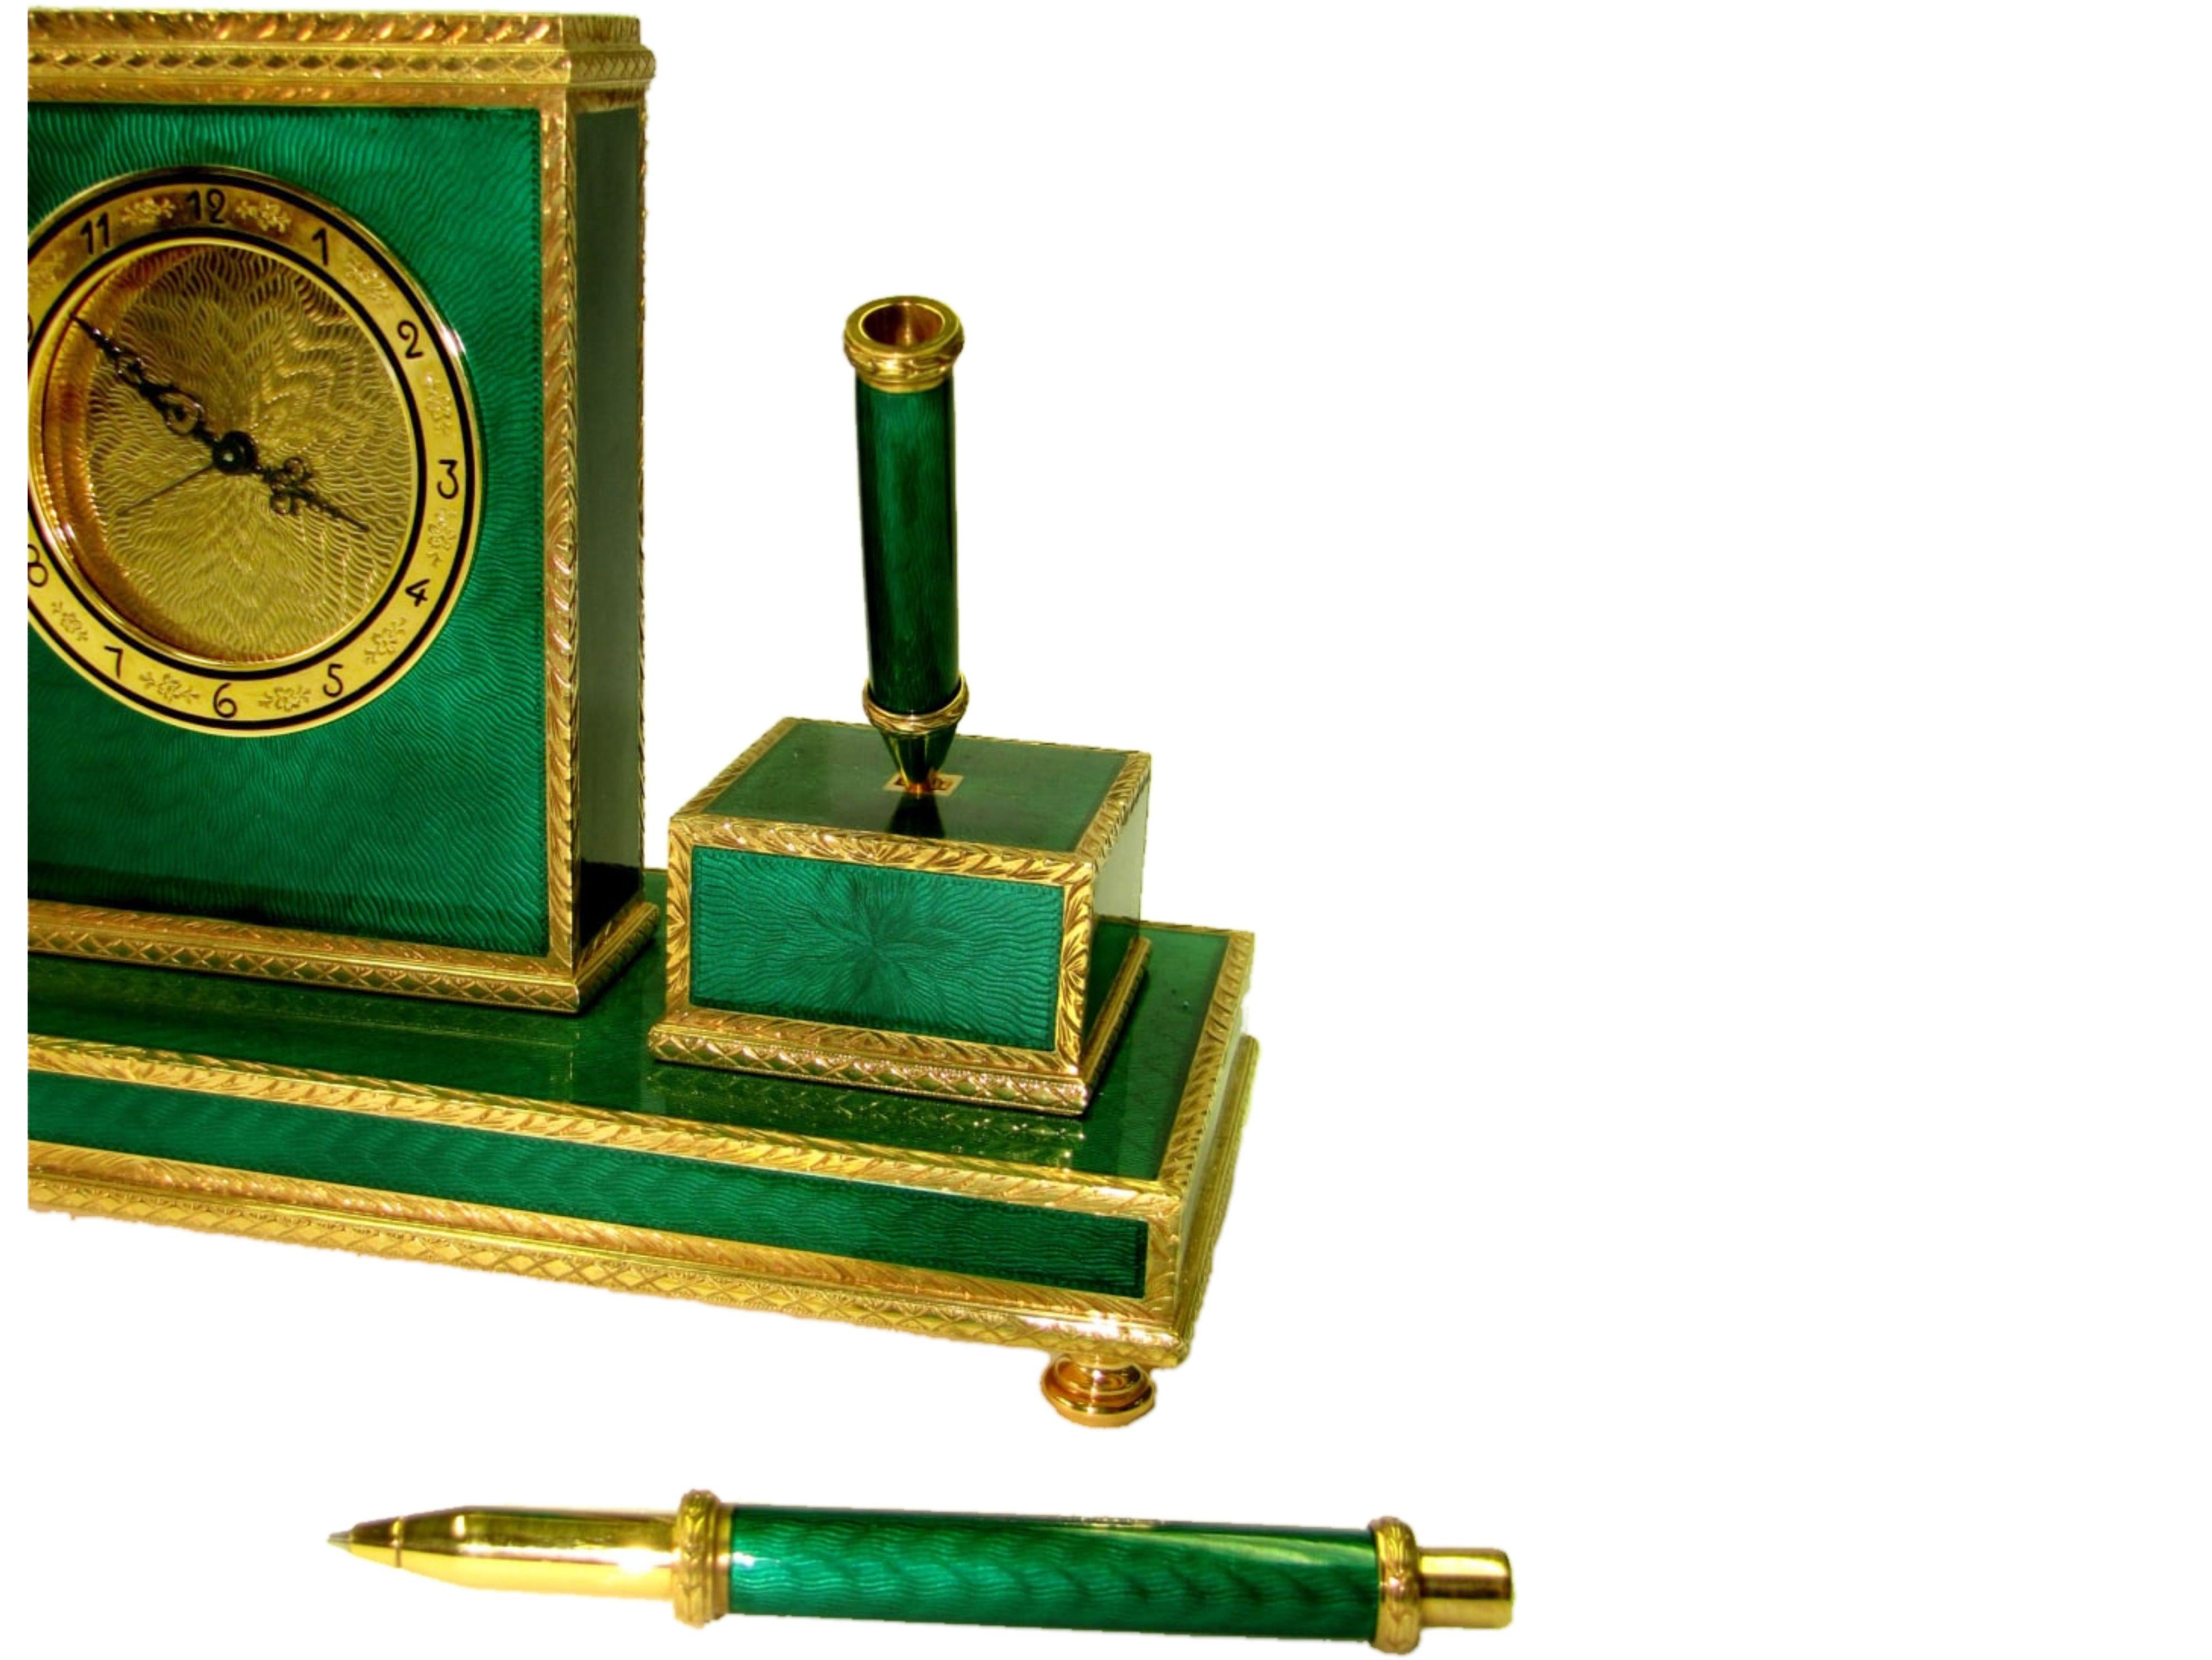 Hand-Carved Sterling Silver Desk Centerpiece Gold Plated with Fire Enamels on Guilloche' Sal